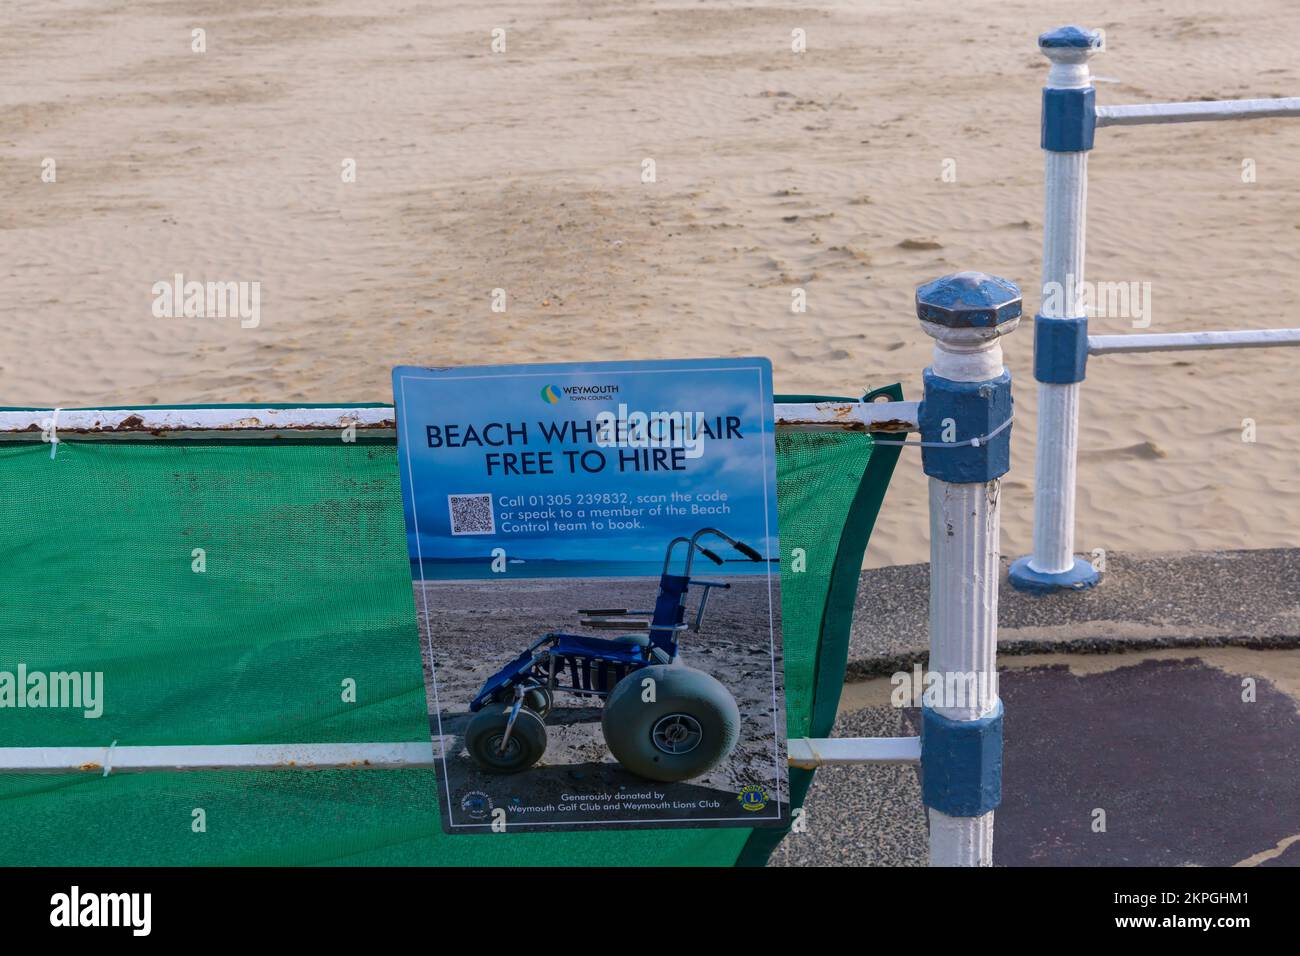 Beach Wheelchair Free to Hire sign at Weymouth beach, Dorset UK in October Stock Photo